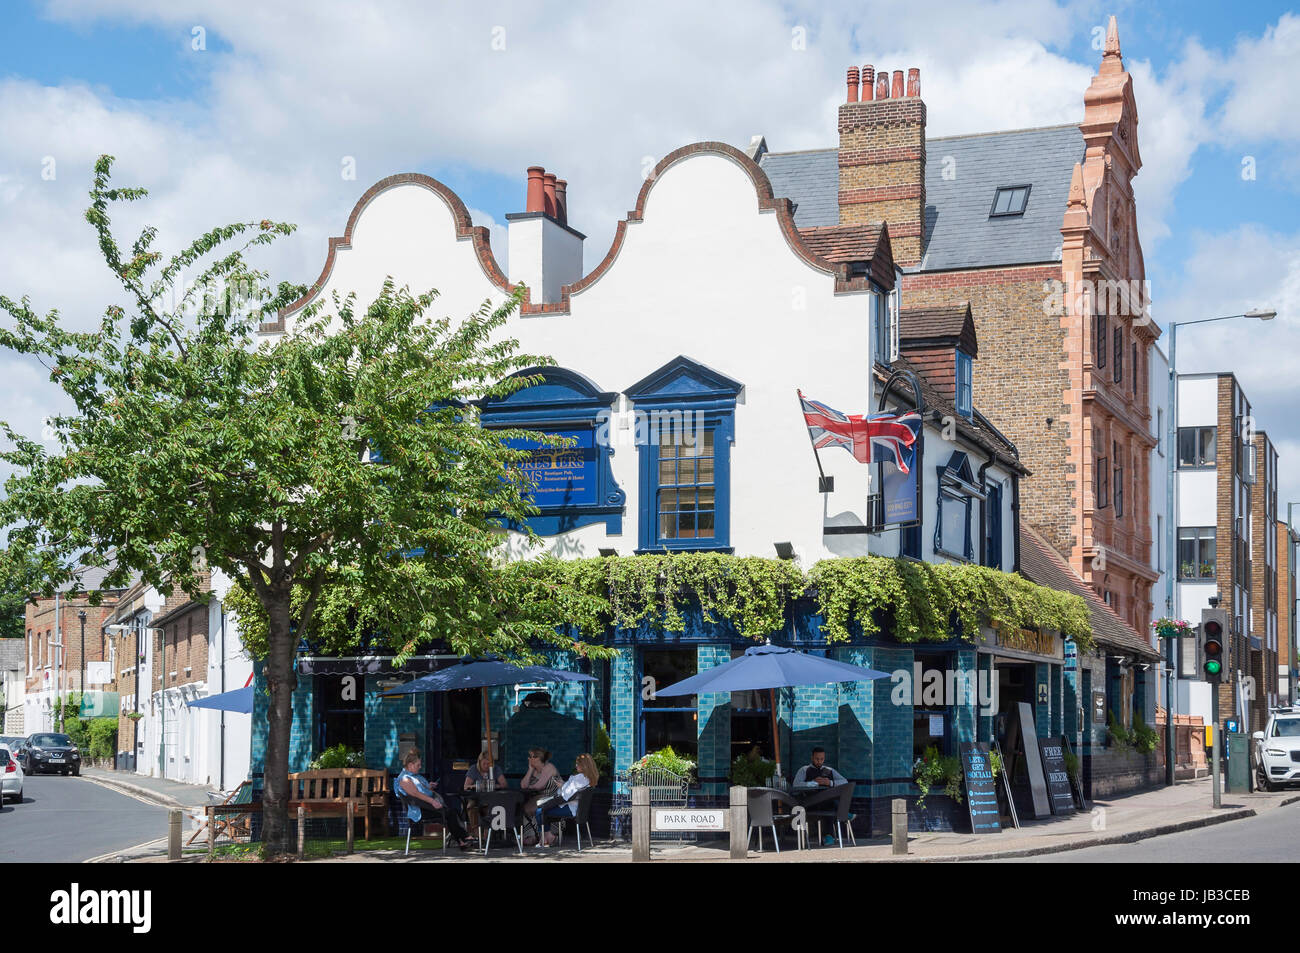 The Foresters Pub, High Street, Hampton Wick, Royal Borough of Richmond upon Thames, Greater London, Angleterre, Royaume-Uni Banque D'Images